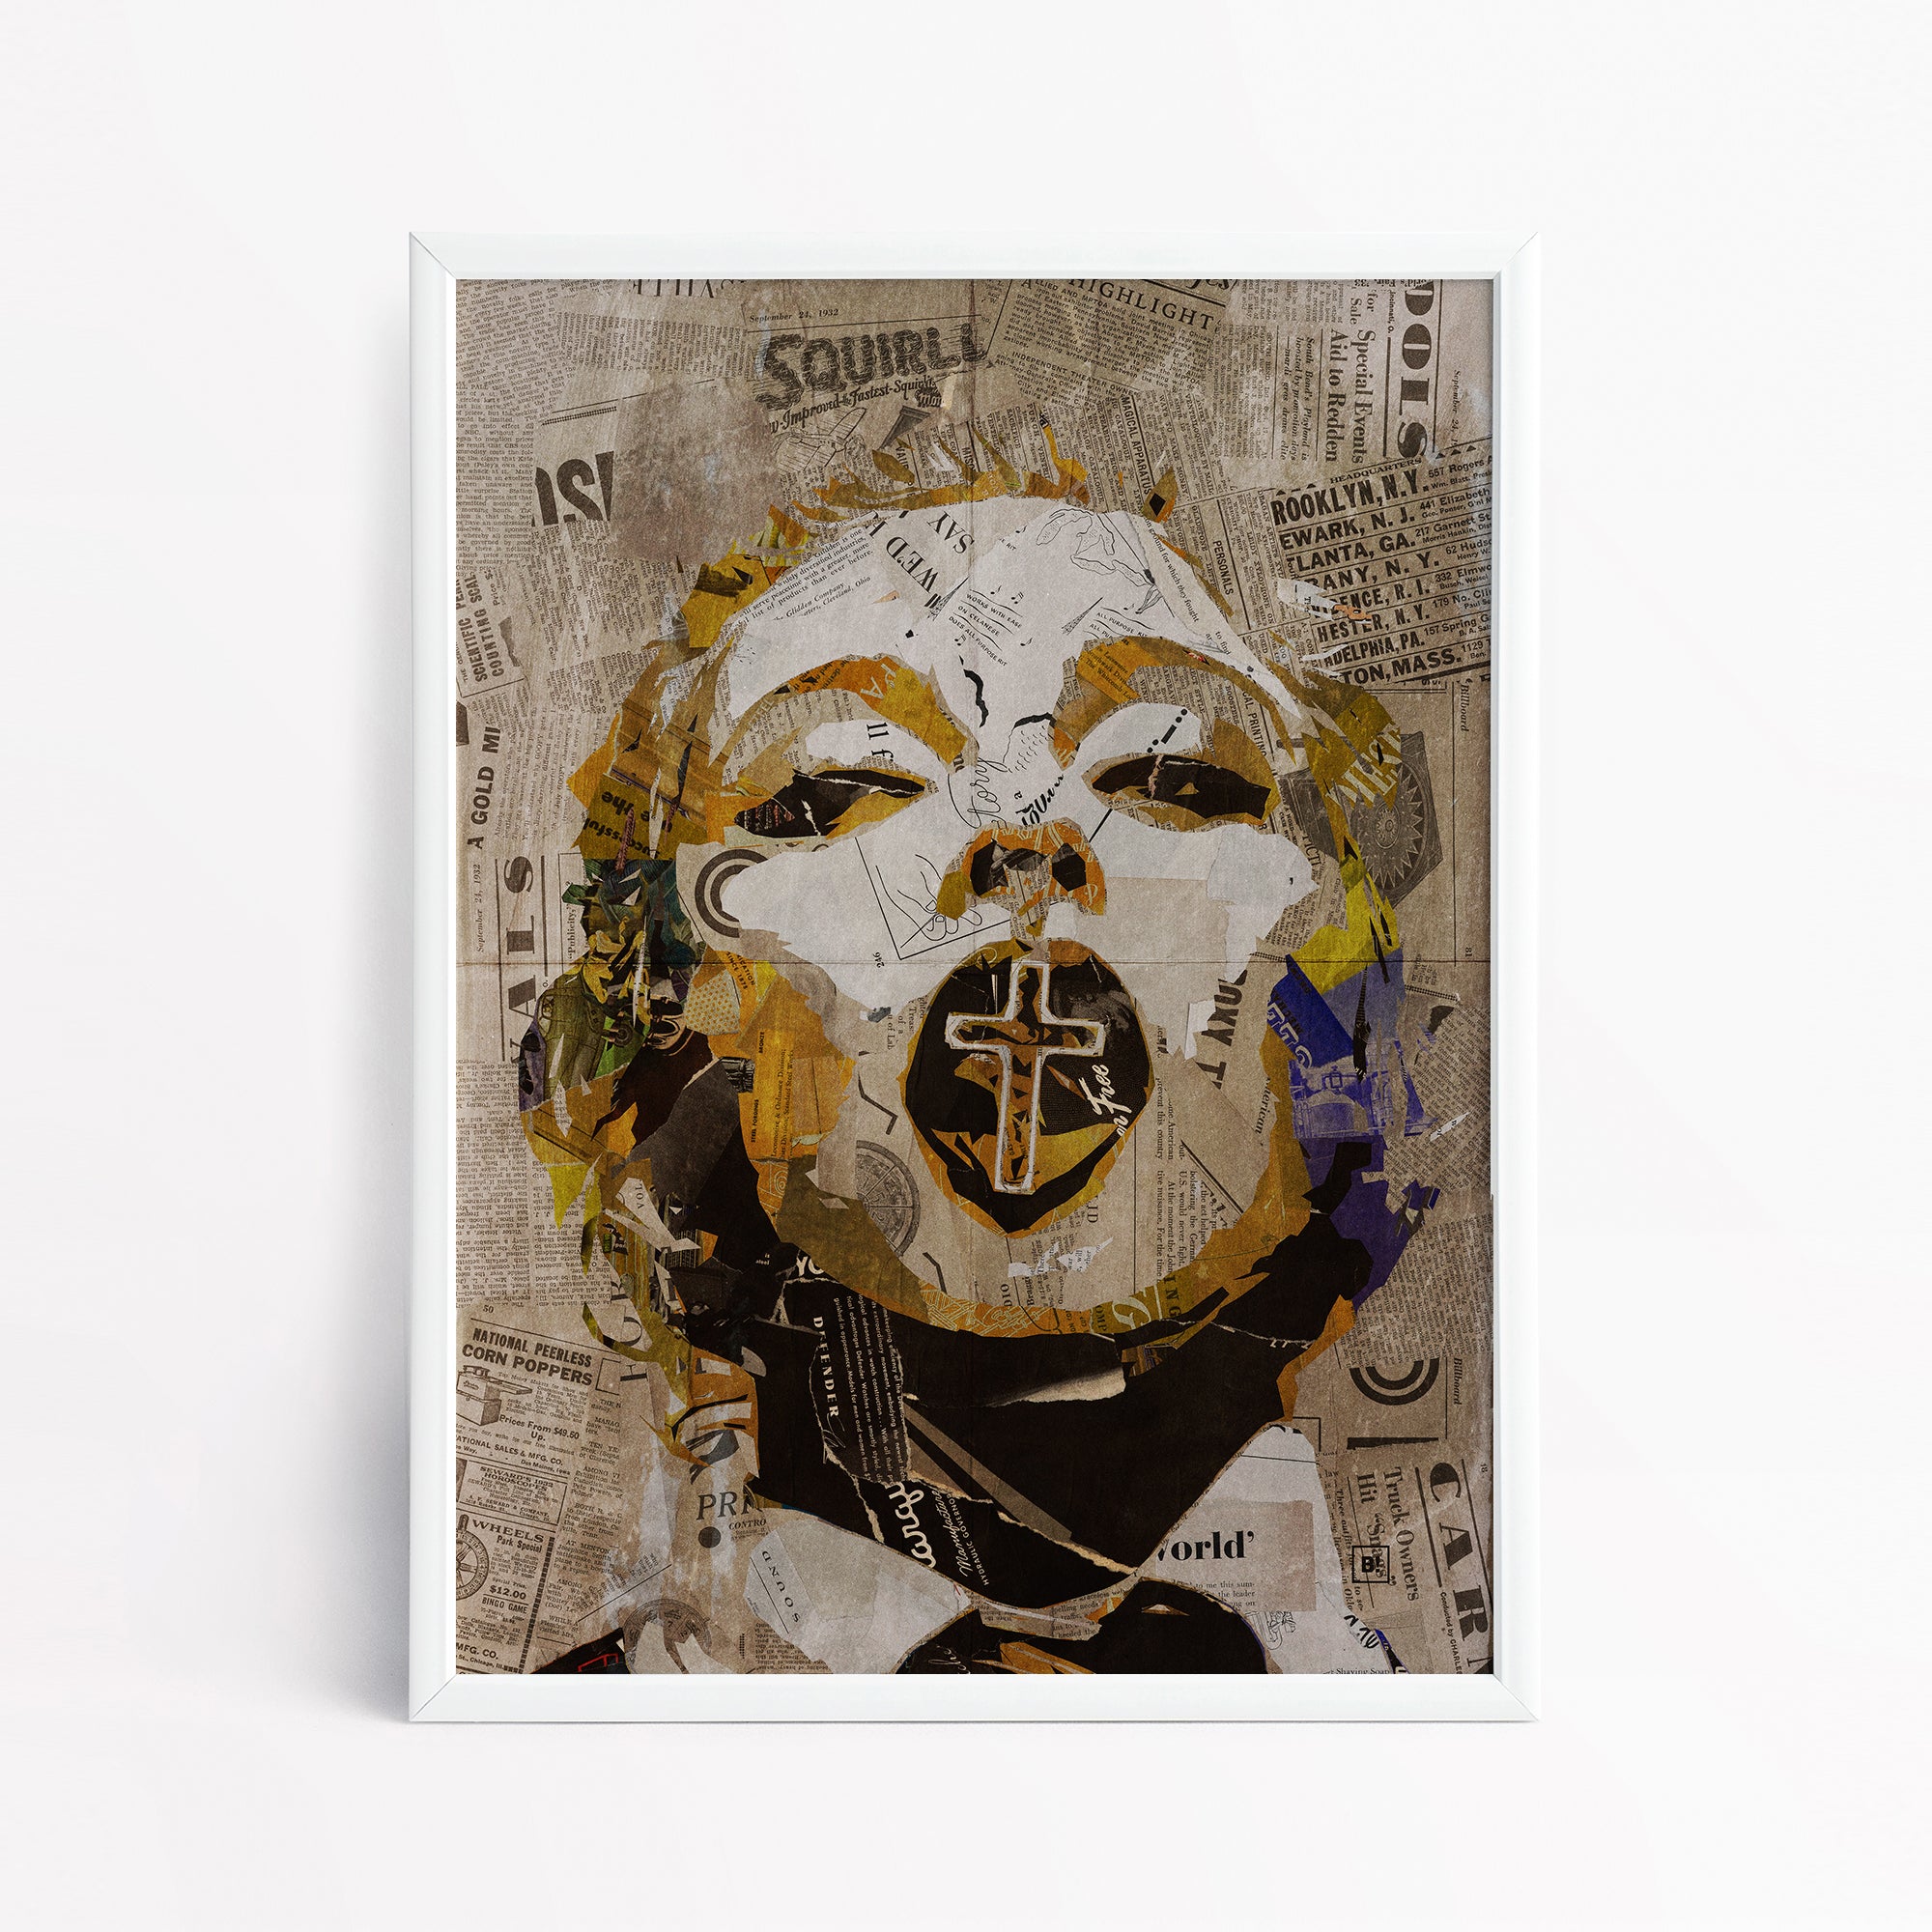 Be inspired by our iconic collage portrait art print of Madonna. This artwork has been printed using the giclée process on archival acid-free paper and is presented in a sleek white frame, showcasing its timeless beauty in every detail.